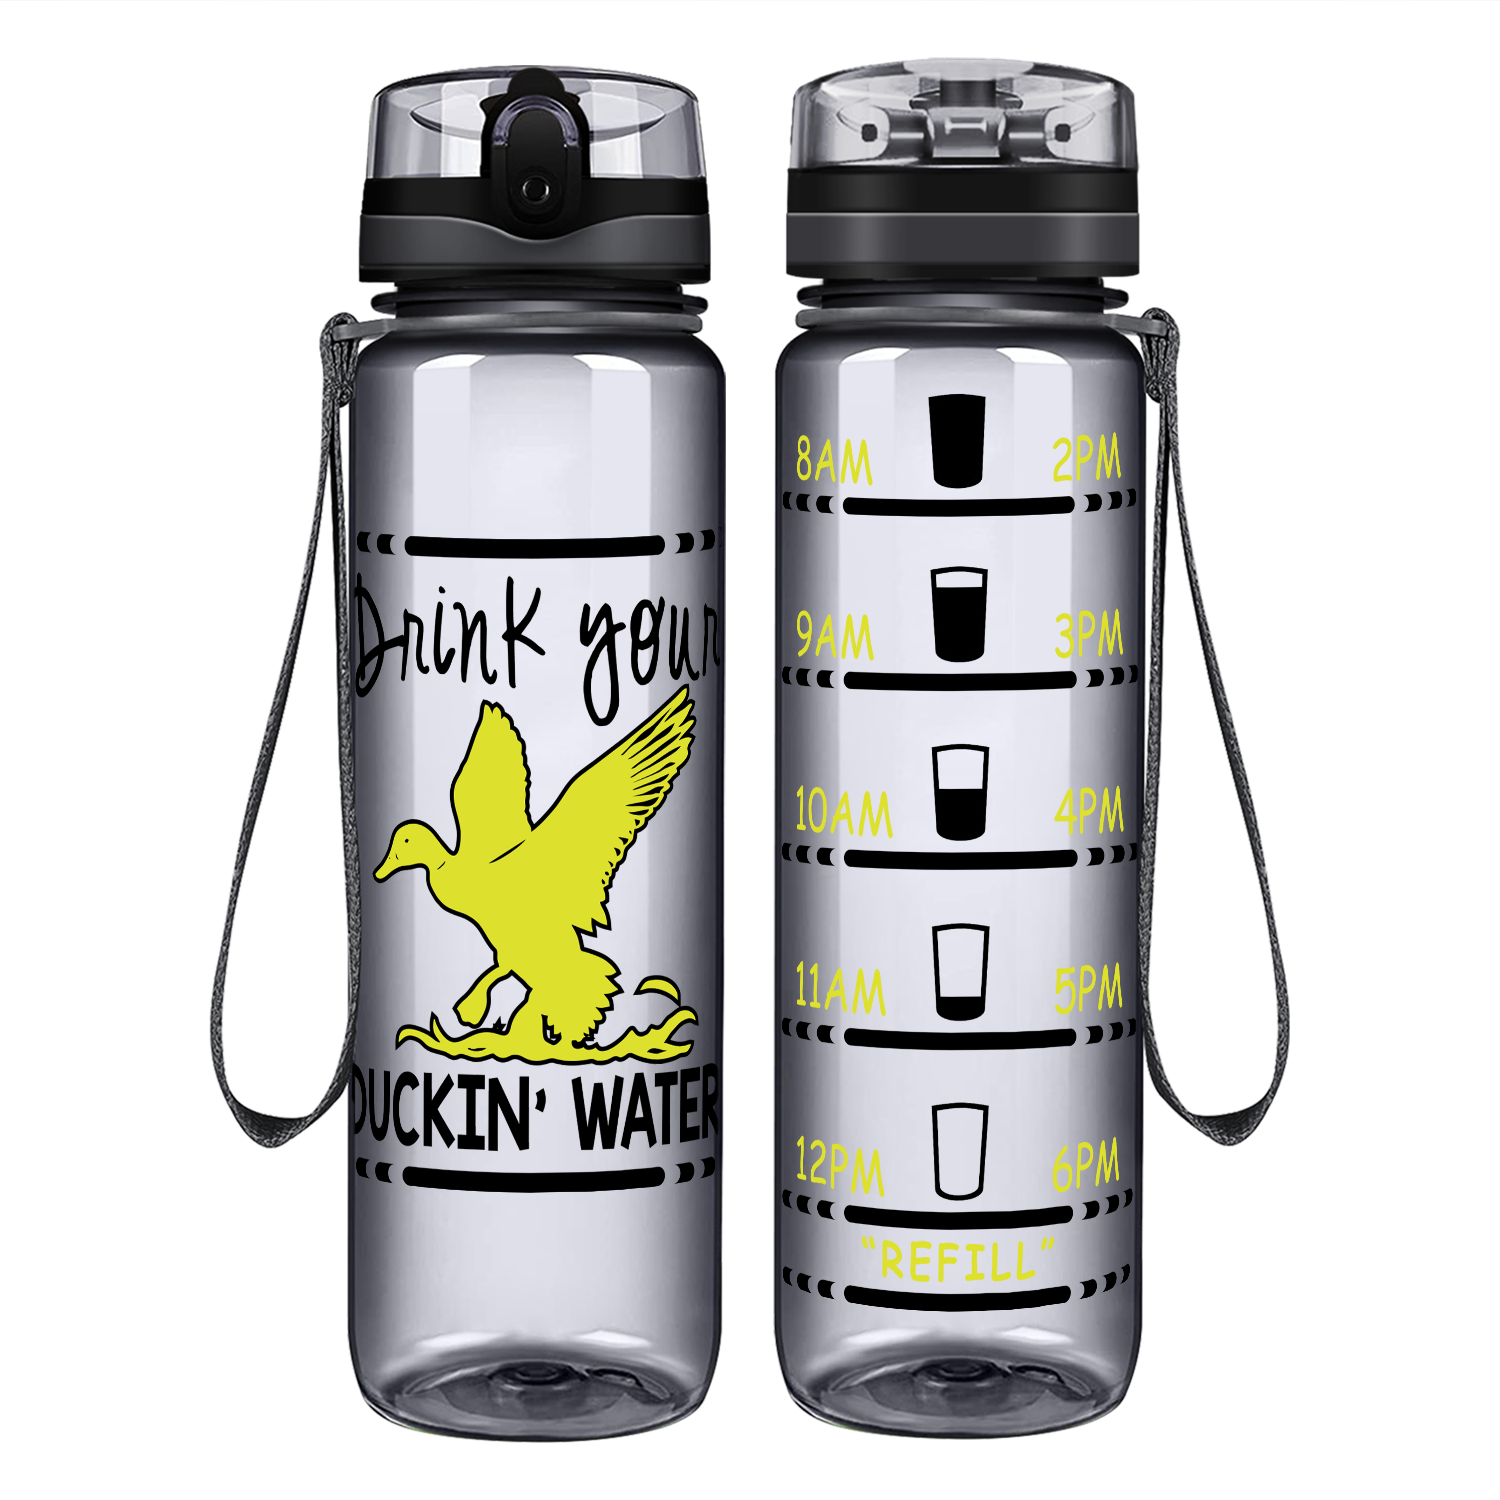 Drink Your Ducking Water on 32 oz Motivational Tracking Water Bottle